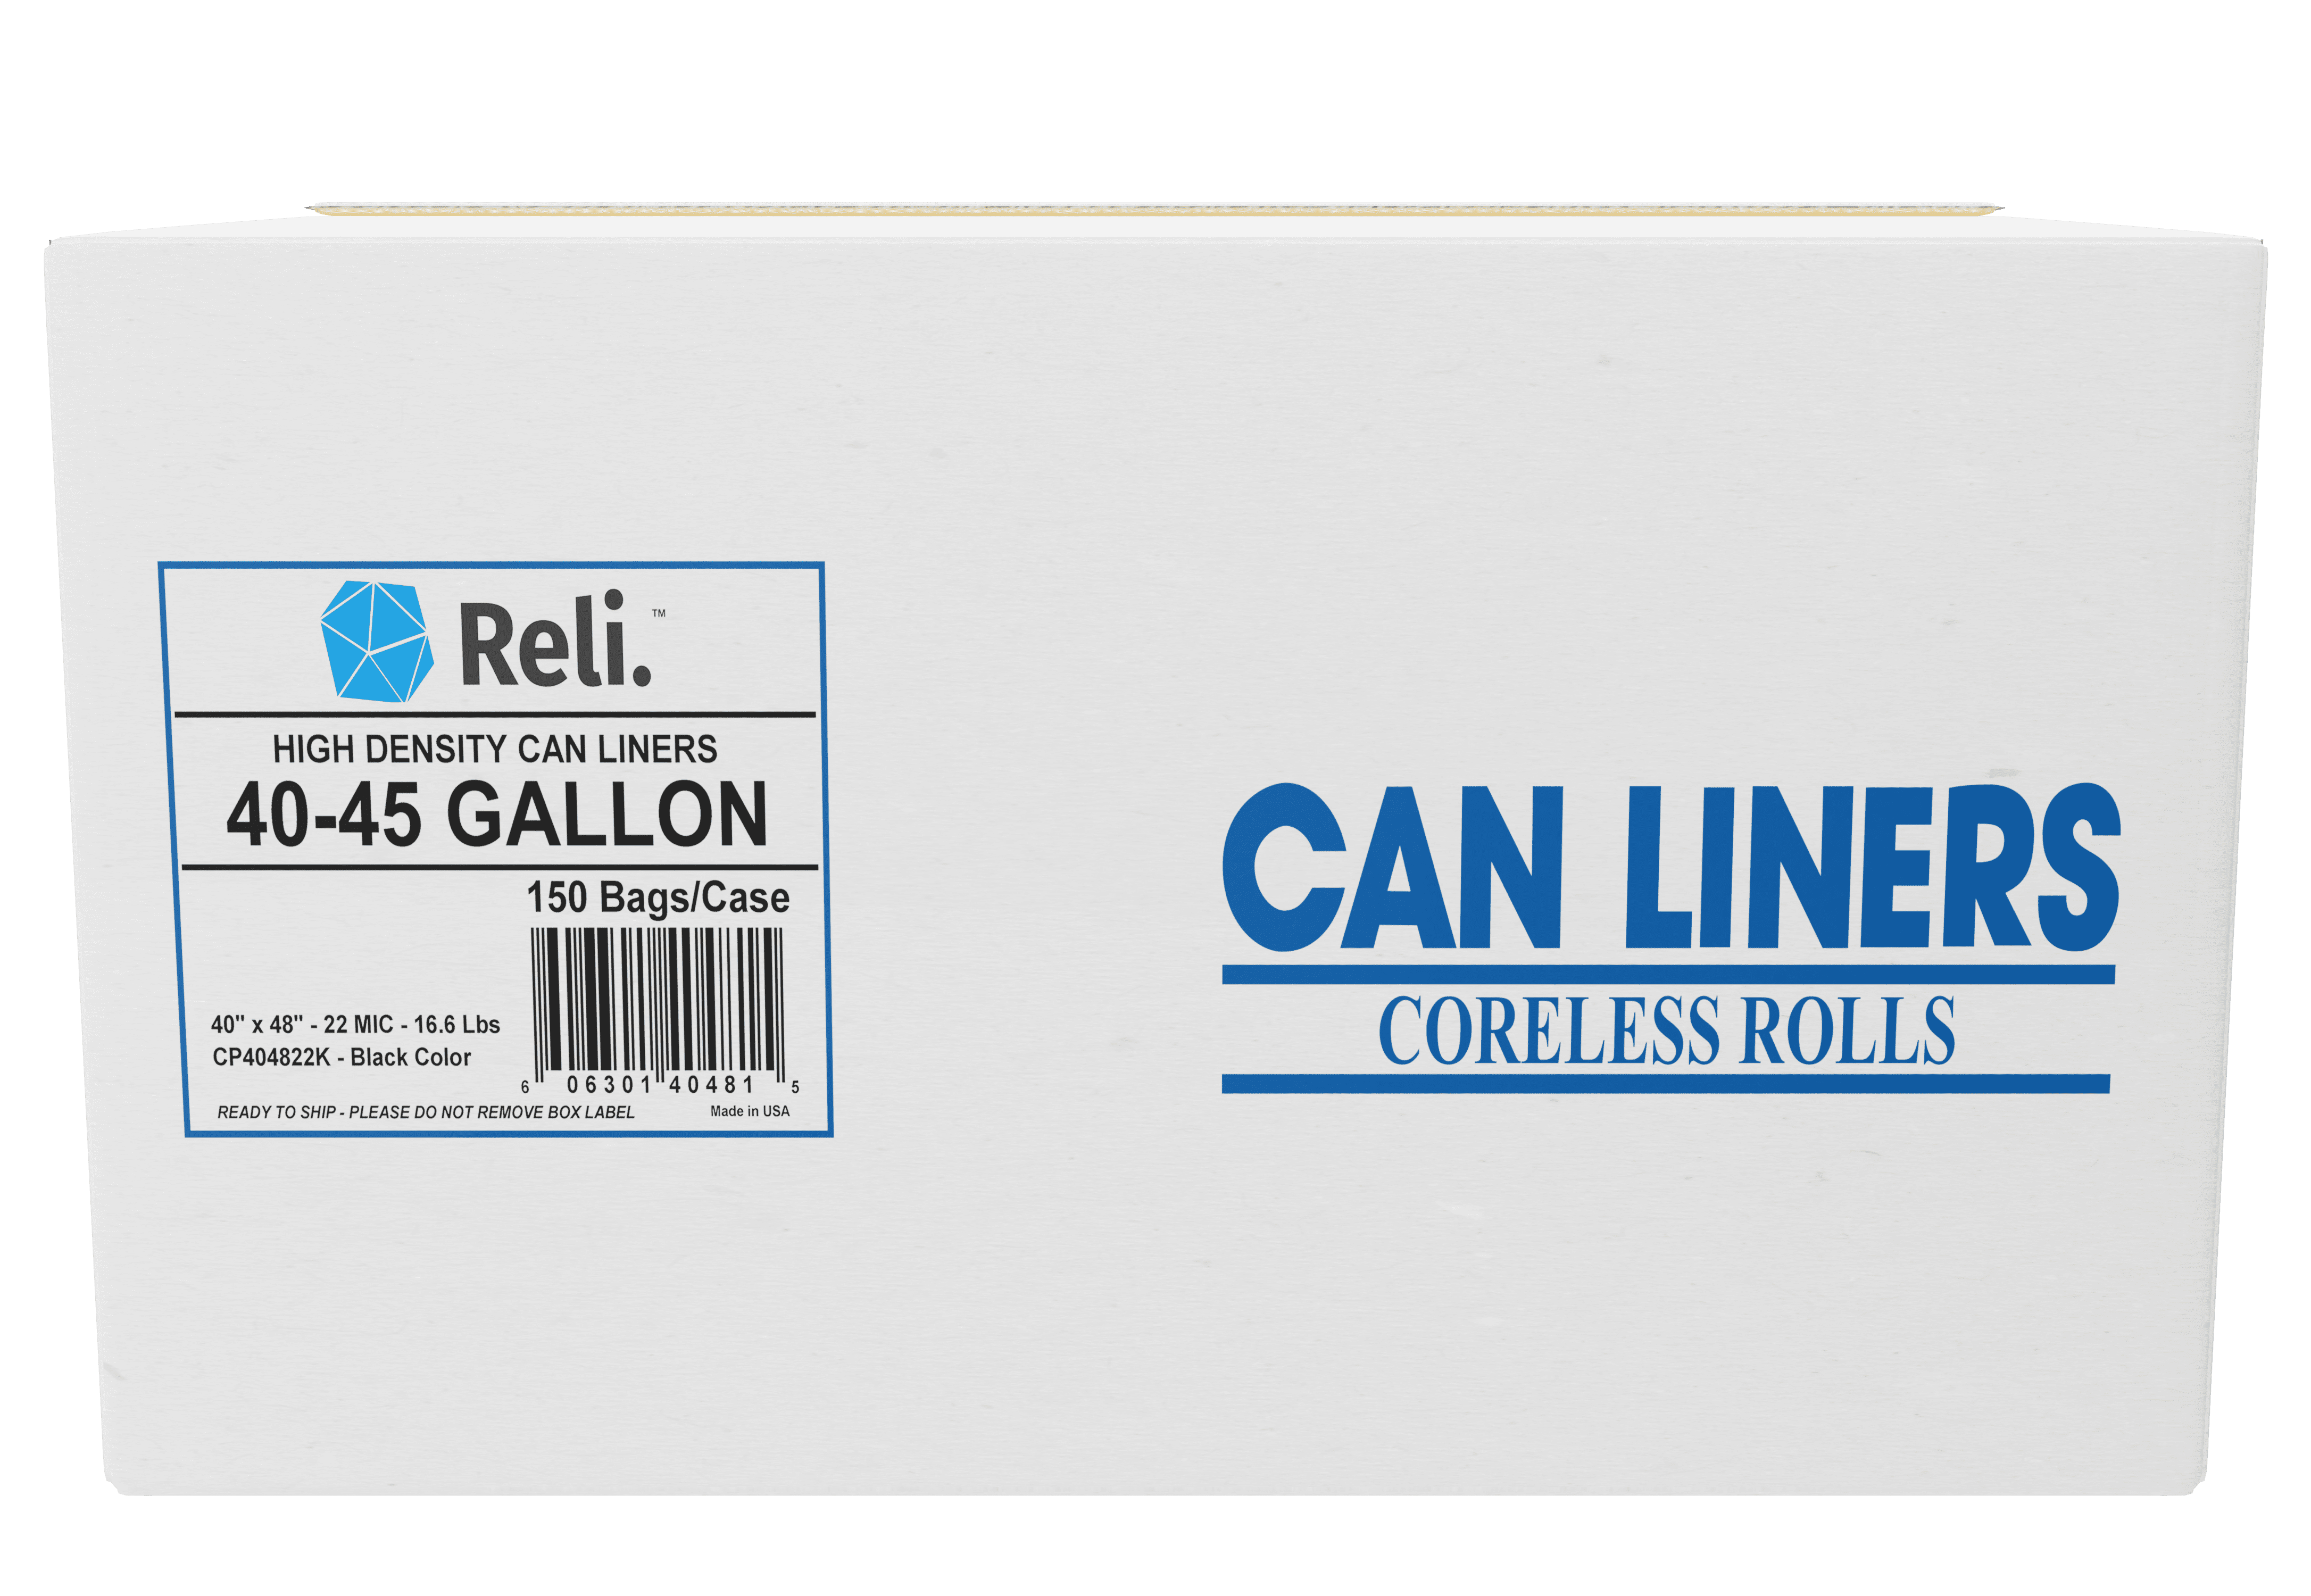 40 Gallon- 44 Gallon Made in USA Reli 150 Count Premium 40-45 Gallon Trash Bags Heavy Duty Can Liners 40-45 Gal 45 Gallon Clear Trash Bags Garbage Bags Clear Recycling Bags 45 Gallon 